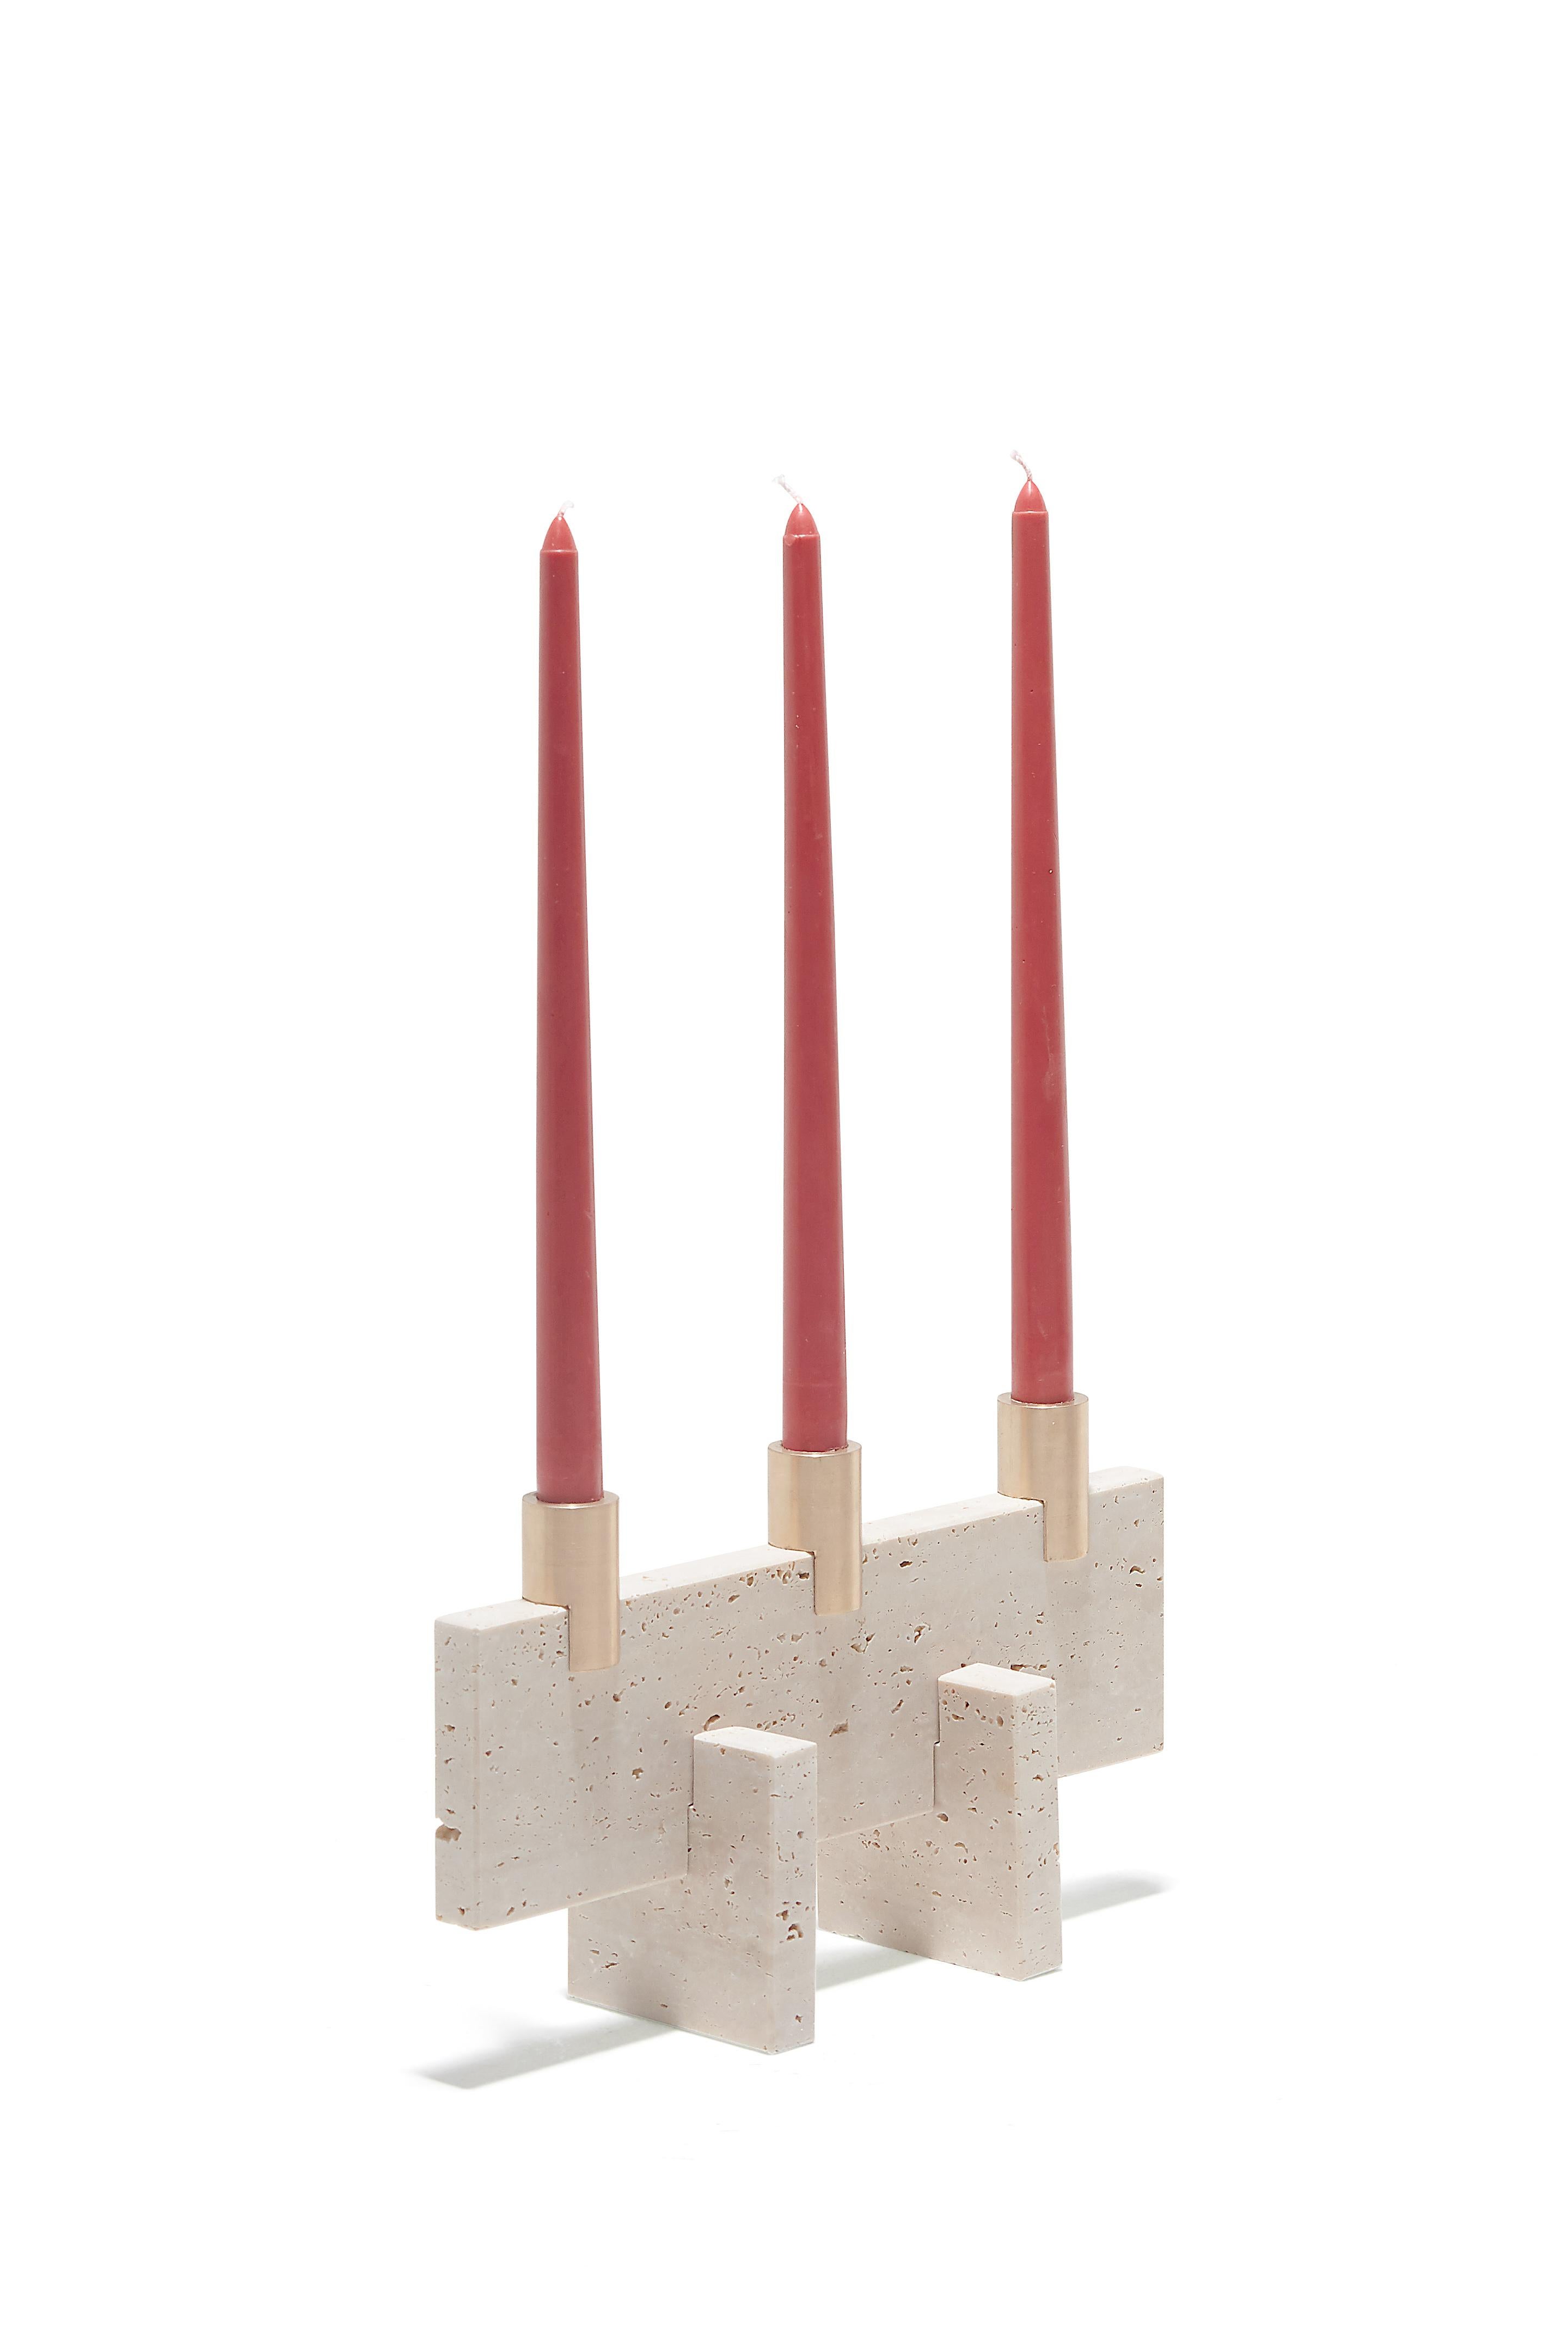 Fit candle 3 by Joseph Vila Capdevila
Material: Travertino marble, Brass
Dimensions: 17 x 31 x 9 cm
Weight: 2.6 kg 


Aparentment is a space for creation and innovation, experimenting with materials with the goal to develop robust, lasting and